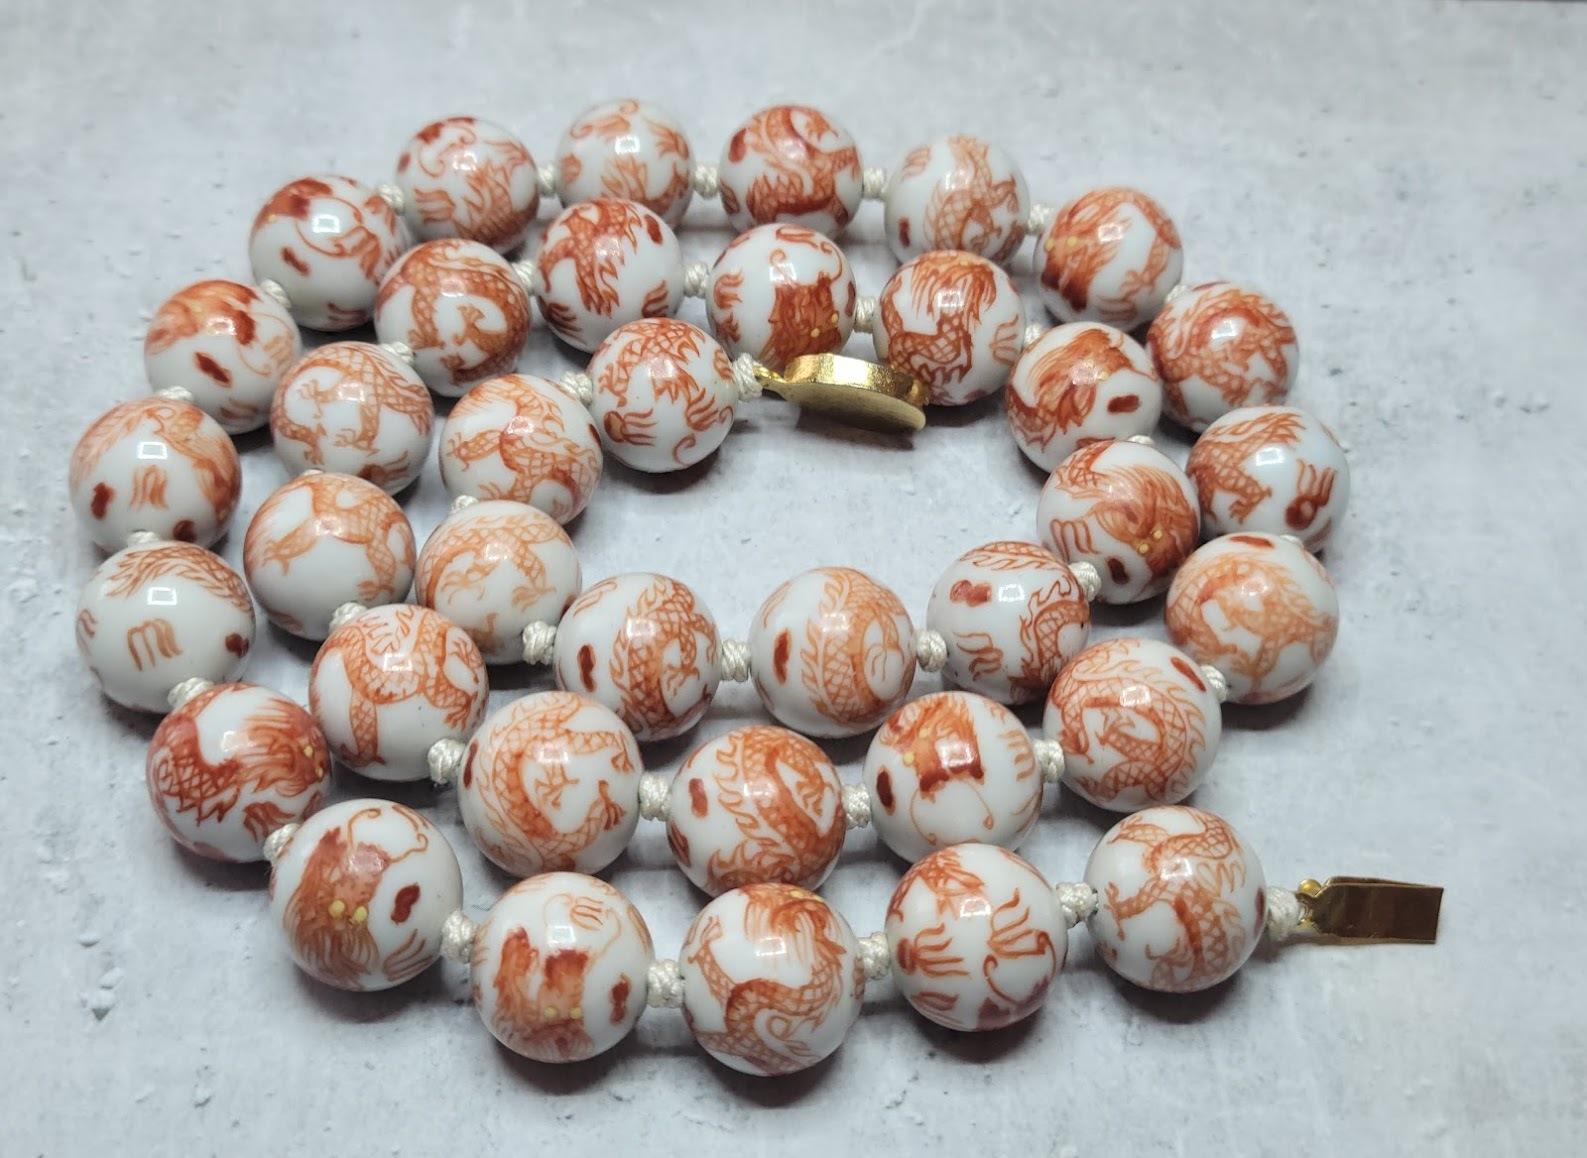 This vintage Chinese porcelain bead necklace features 37 beads with russet orange designs hand-painted on a light-colored whitish hand-knotted silk 